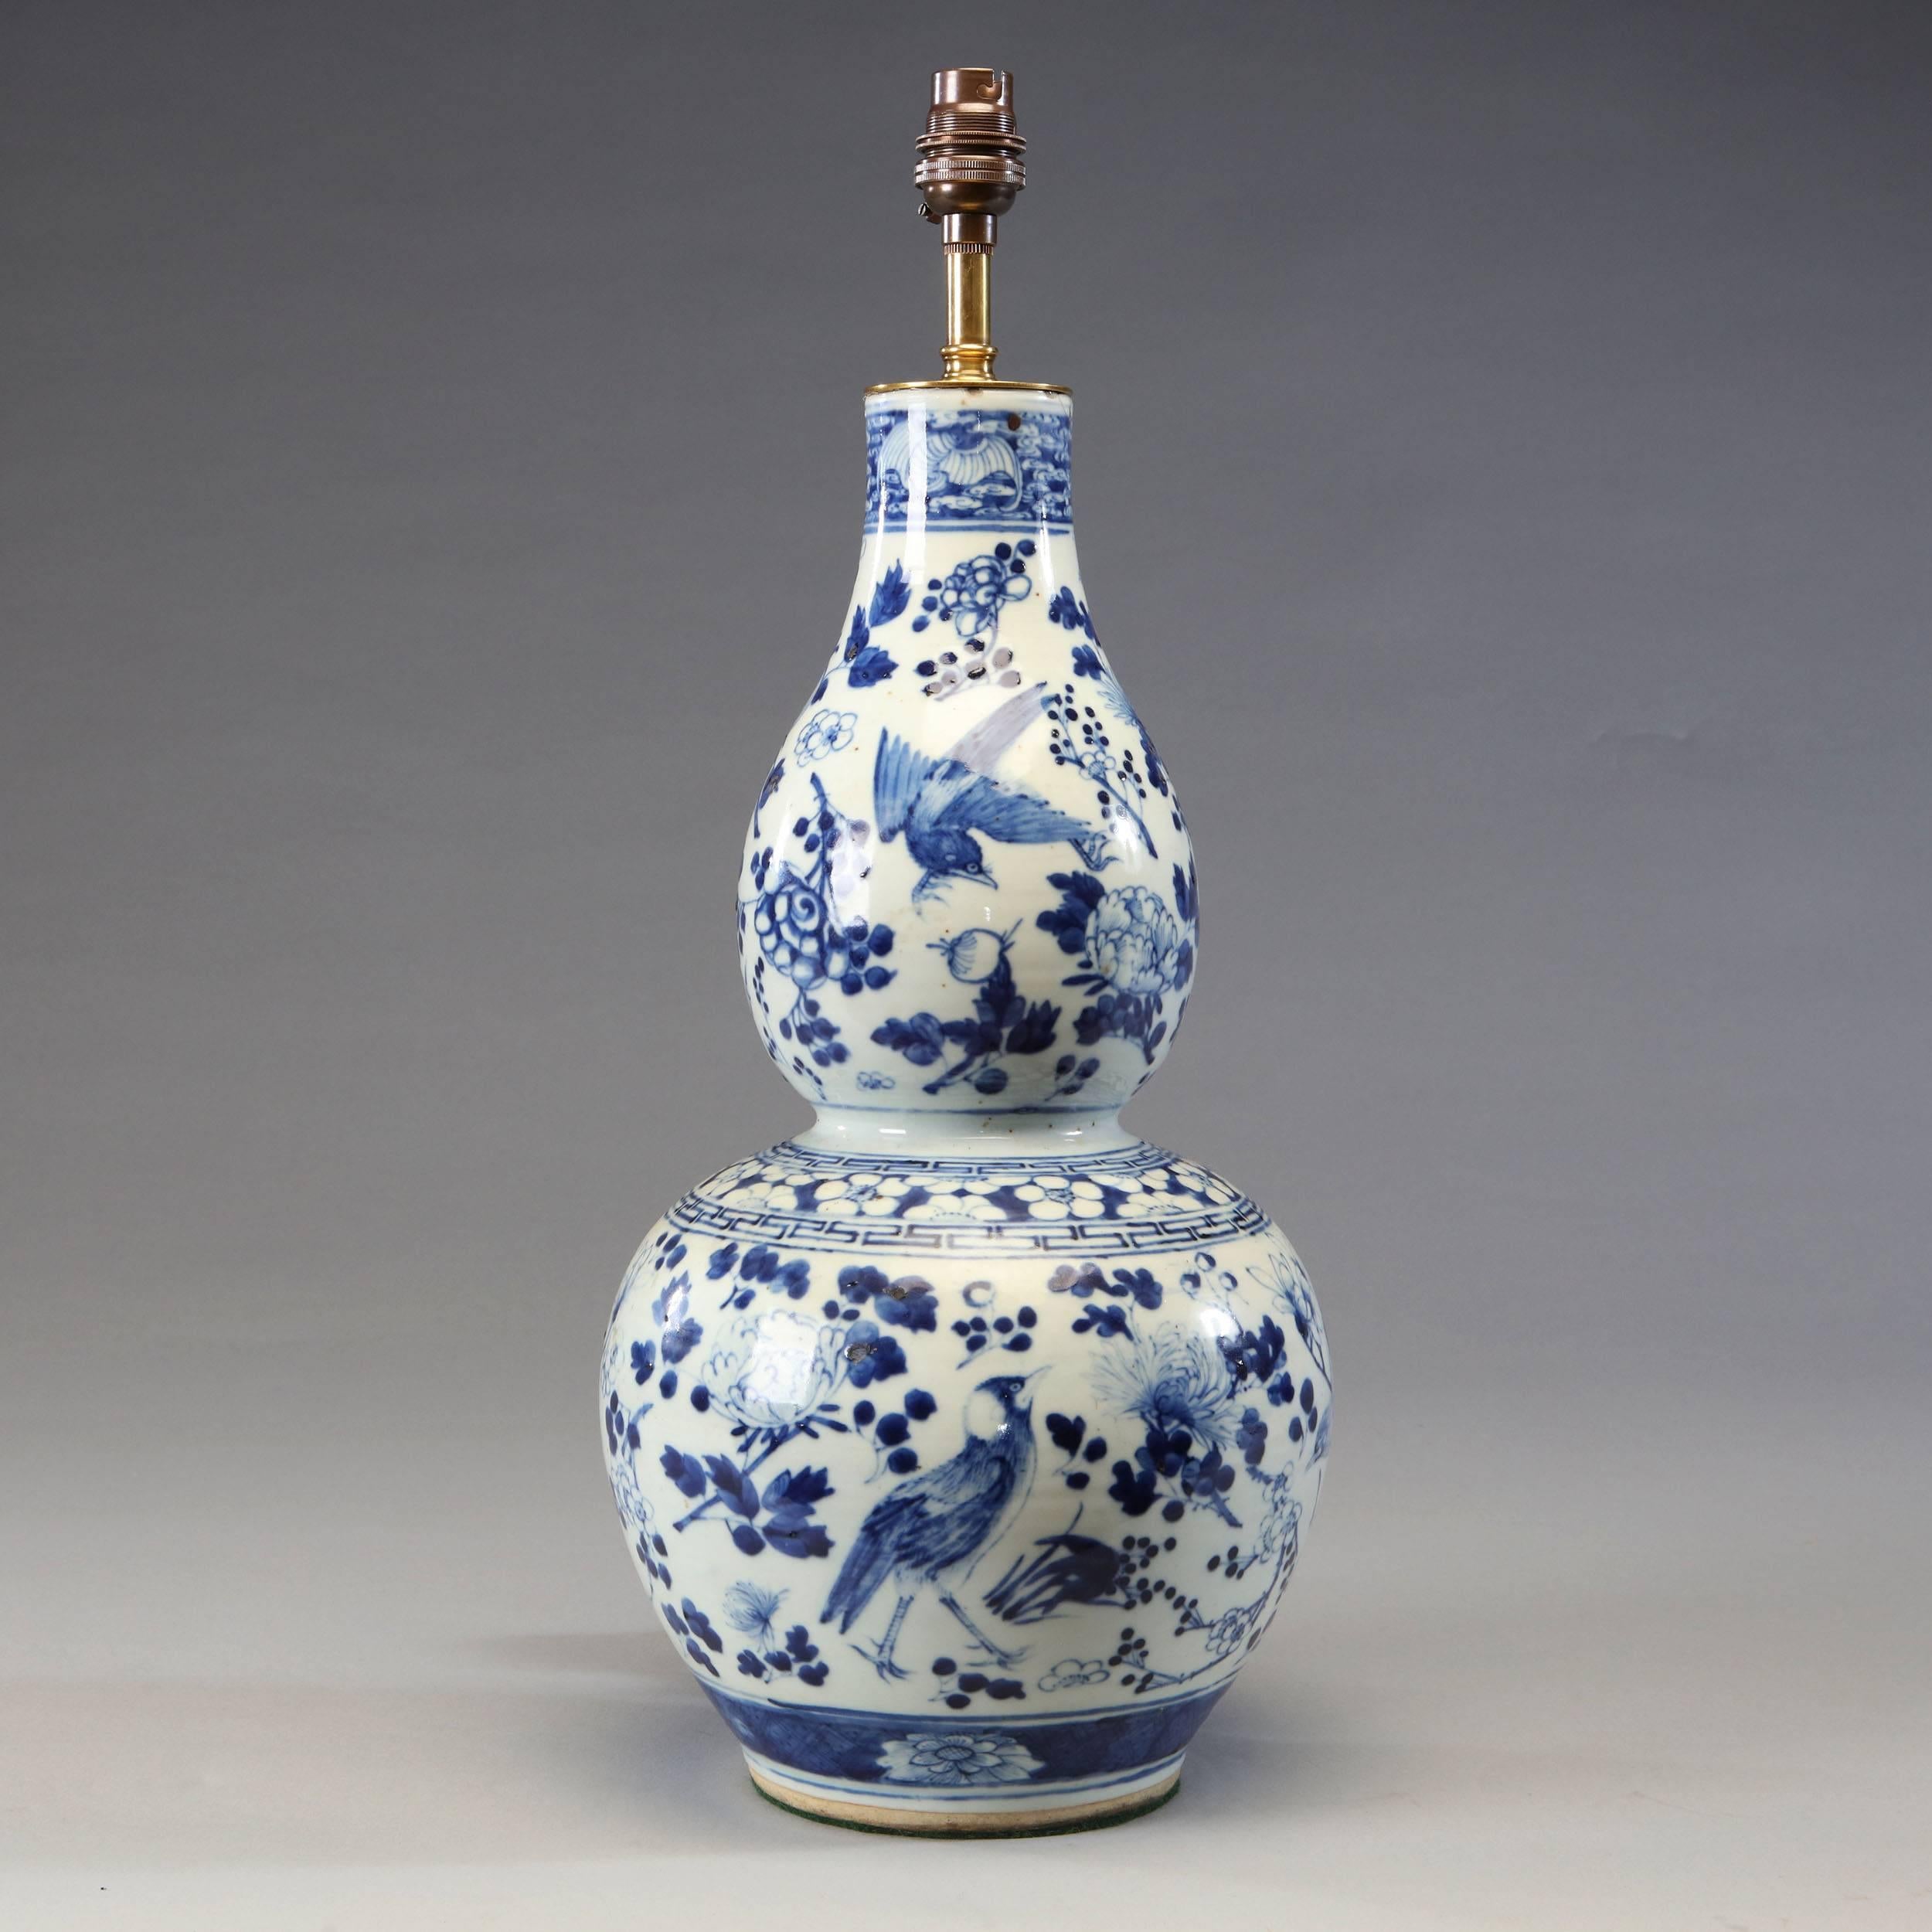 A fine pair of 19th century Chinese blue and white vases of double gourd form, decorated with tropical birds and flora, now converted as lamps.